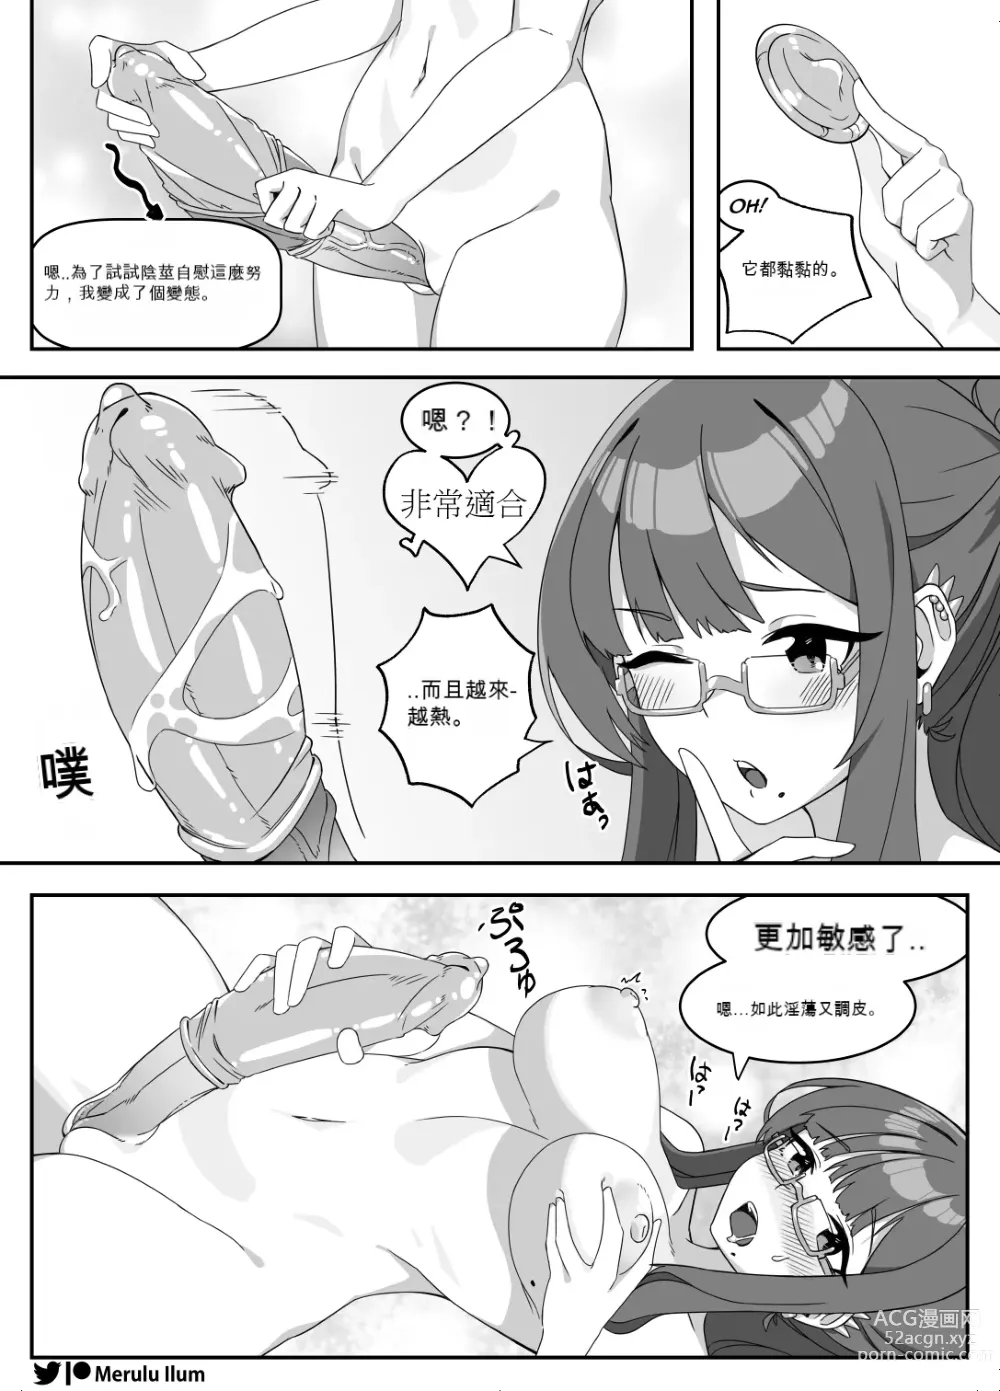 Page 8 of doujinshi Masturbation with a Giant Dick, Lets have fun!